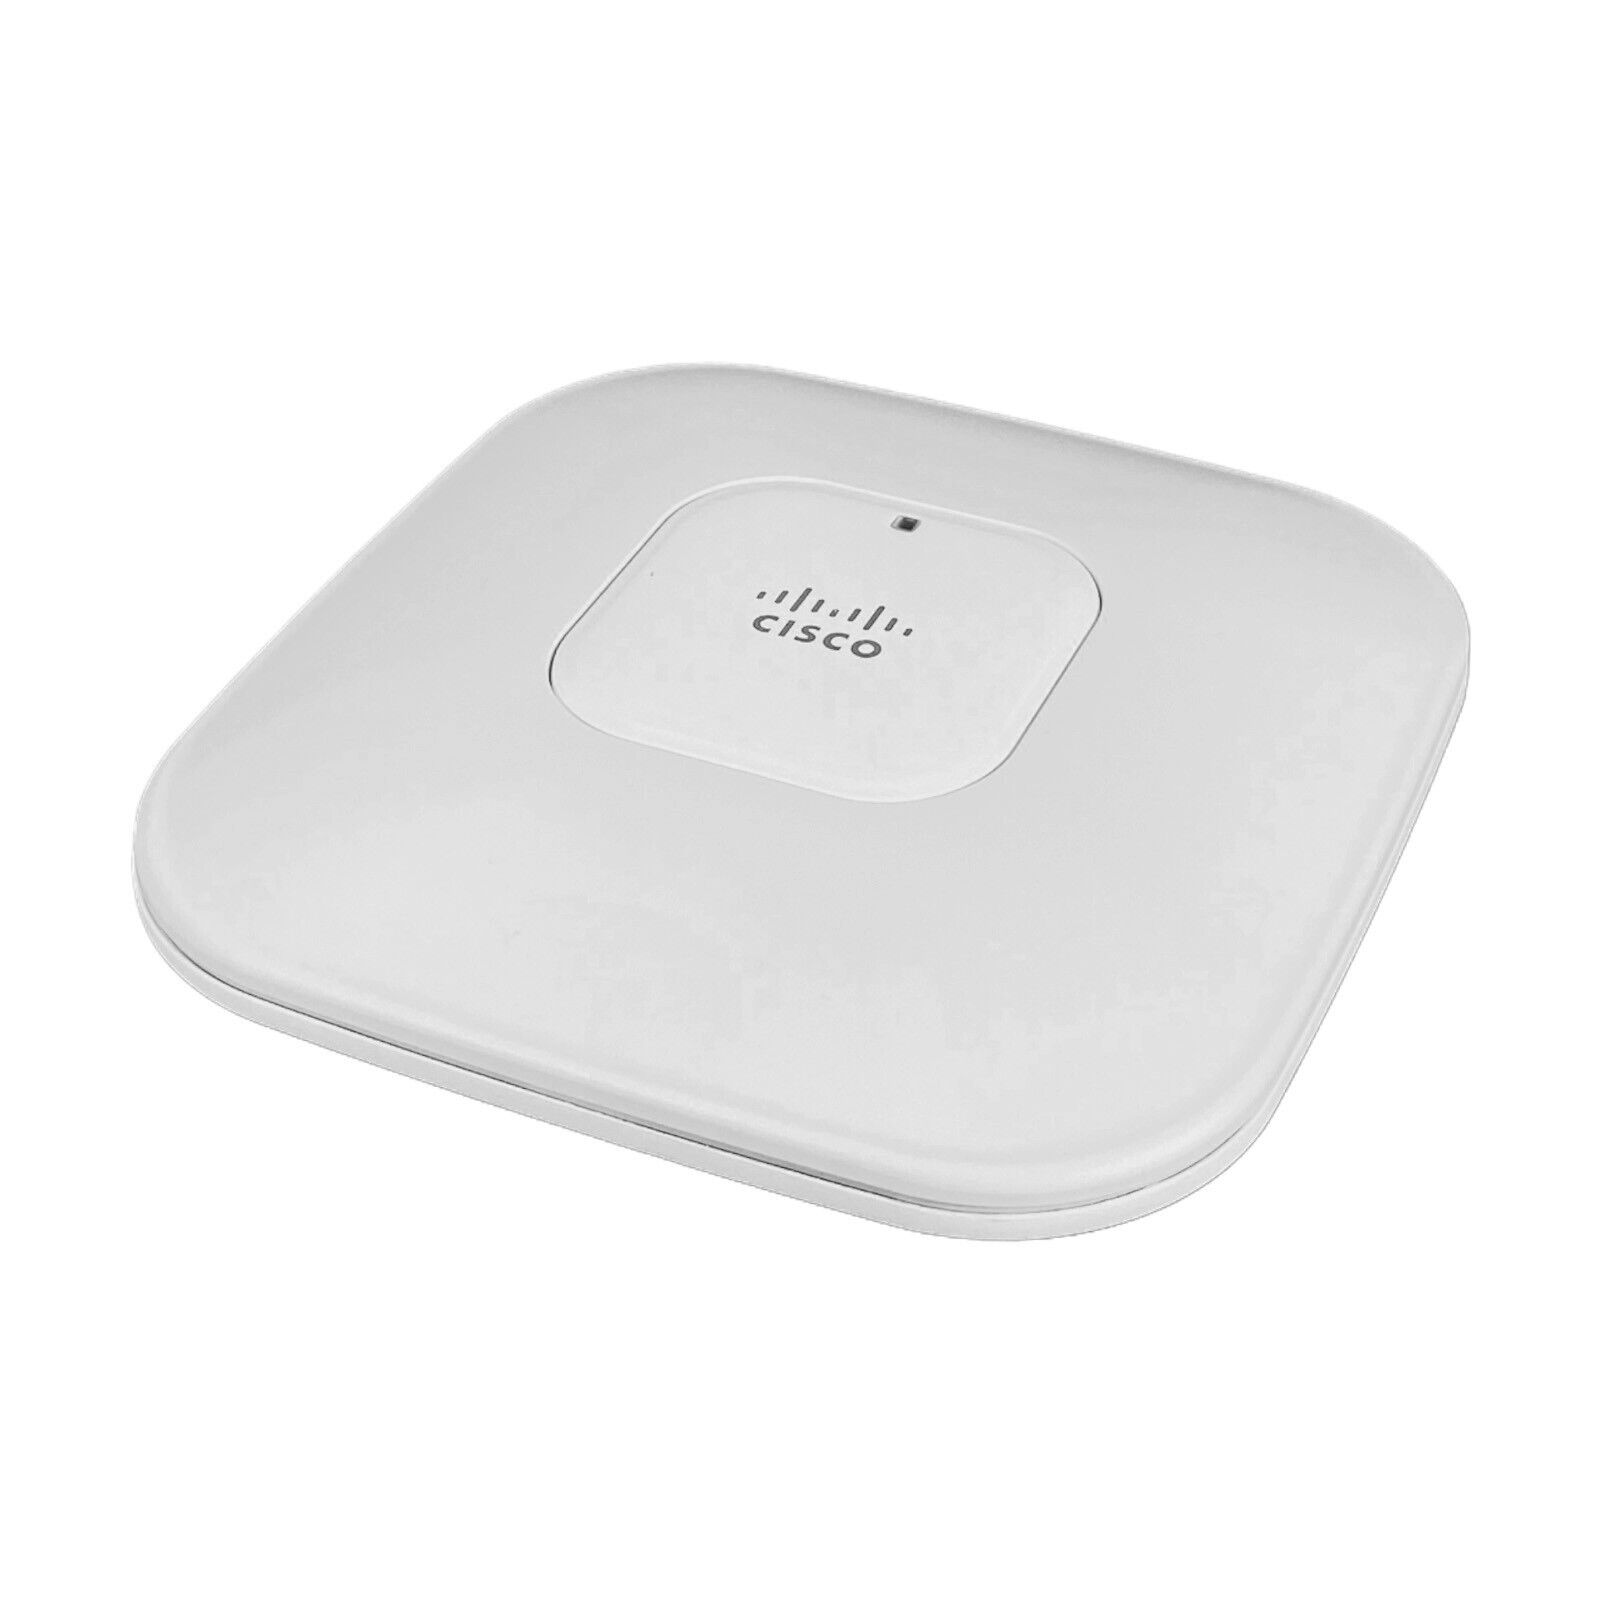 Access Point Wifi Router for Home Flat House Wireless Gigabit Hotspot Network